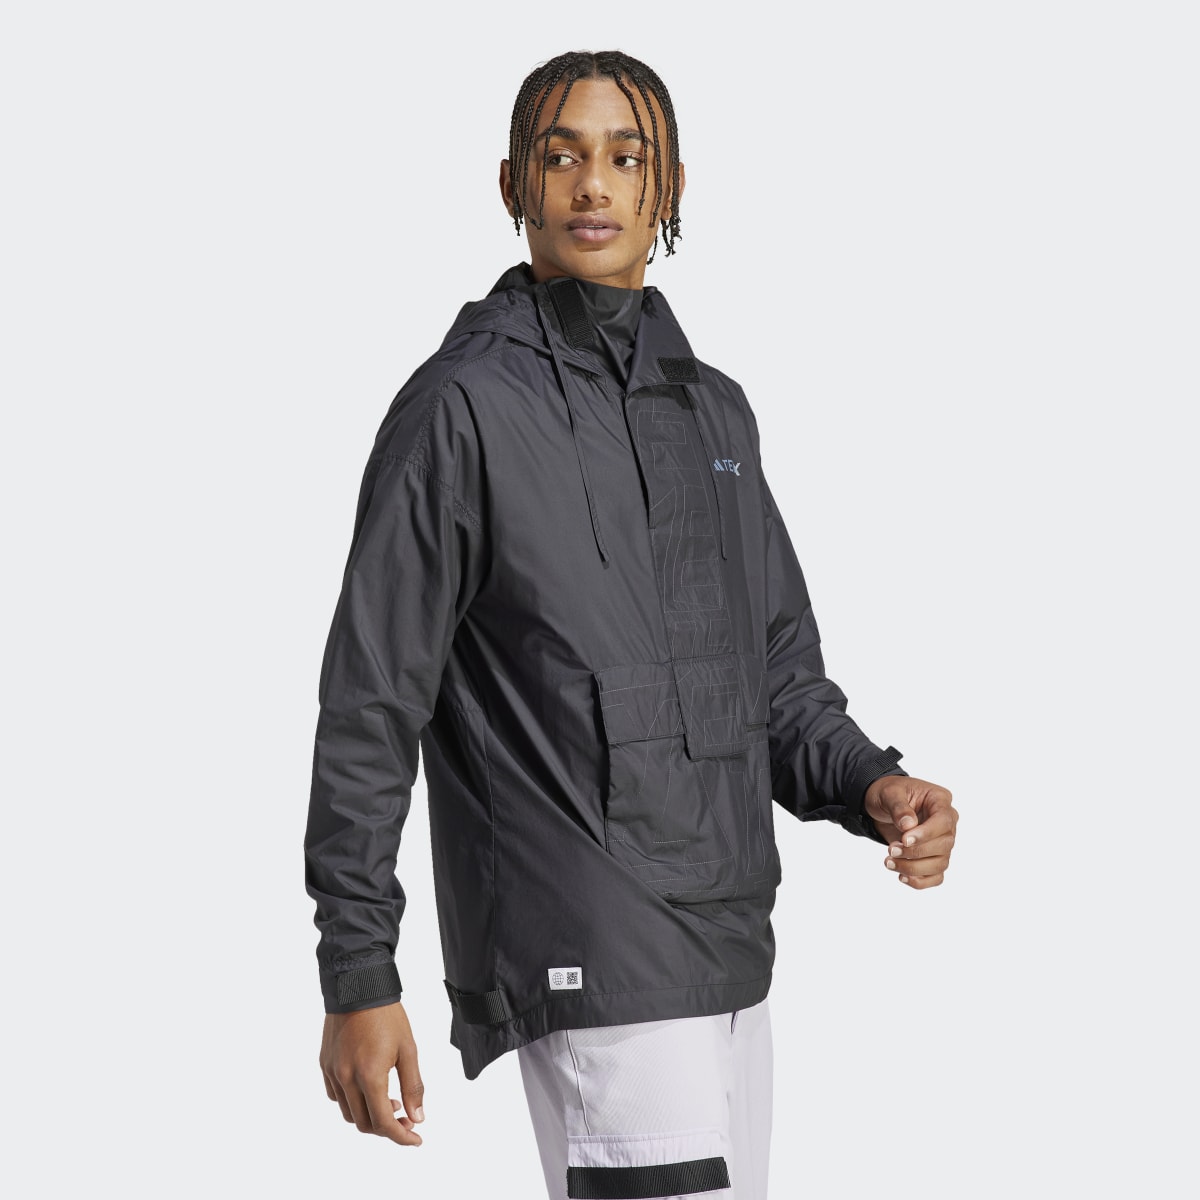 Adidas TERREX Made to Be Remade Wind Anorak. 8